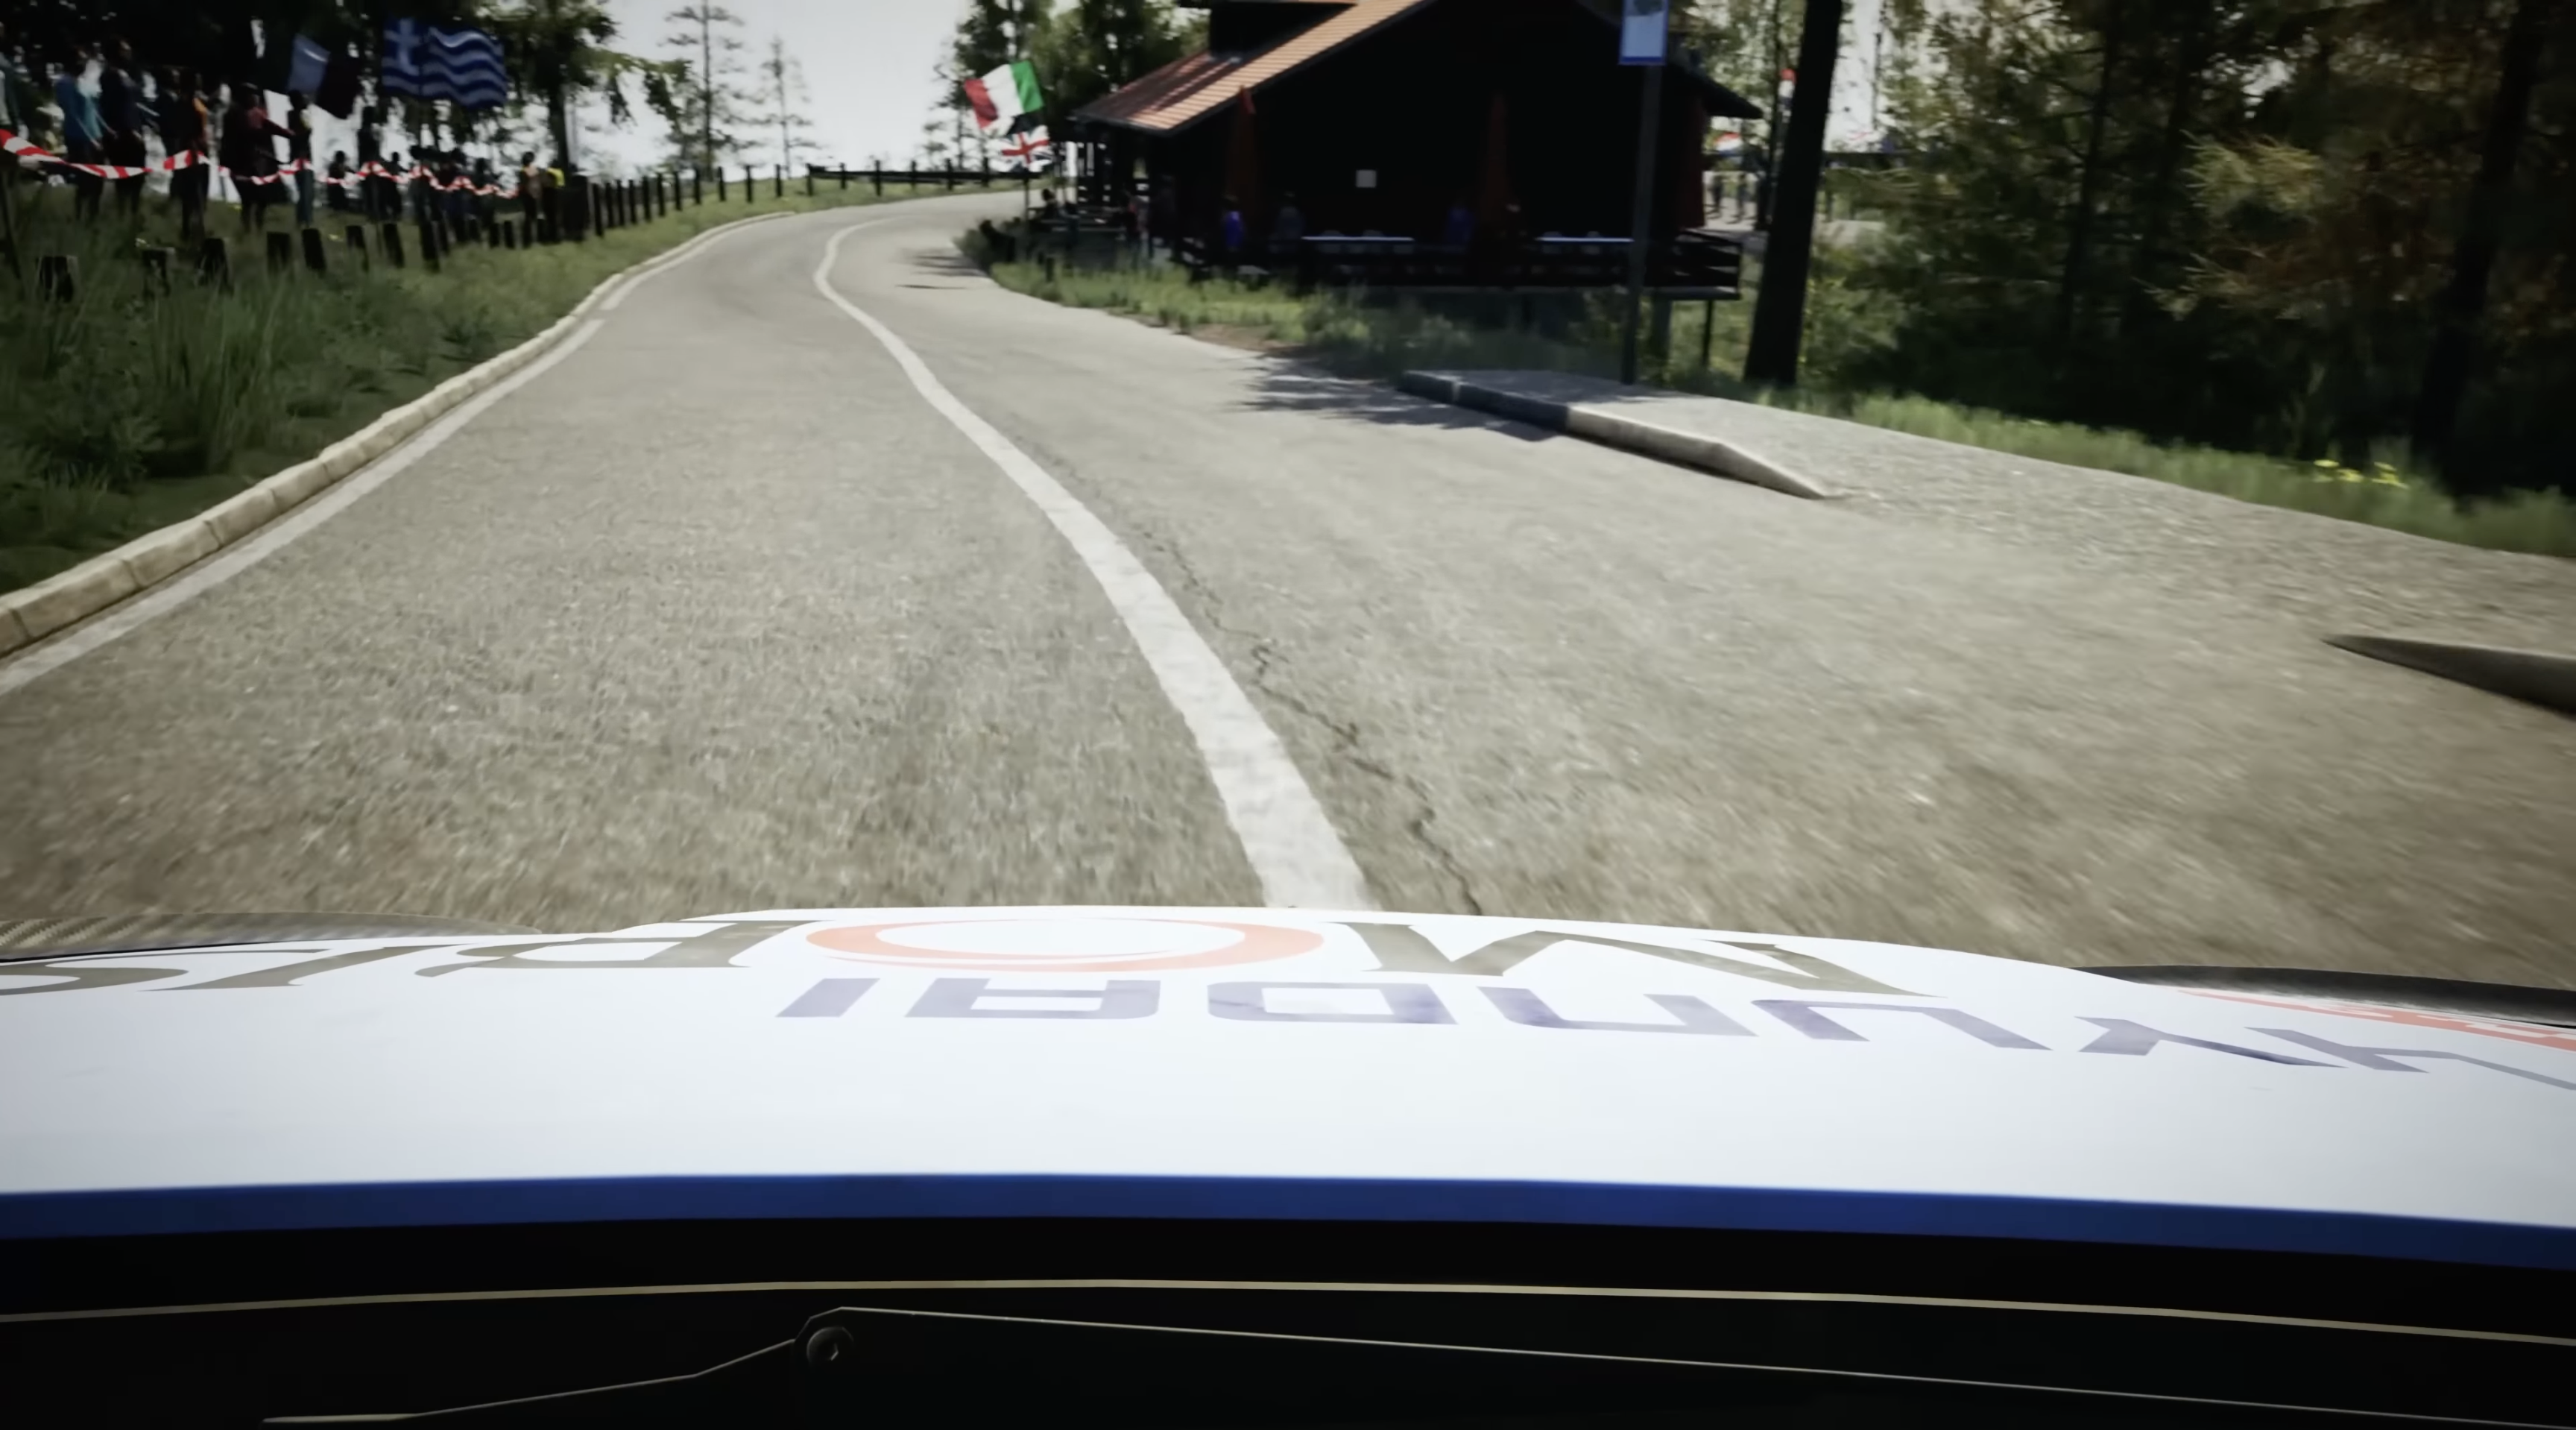 EA Sports WRC Preview: Dirt Rally 3.0 by Another Name